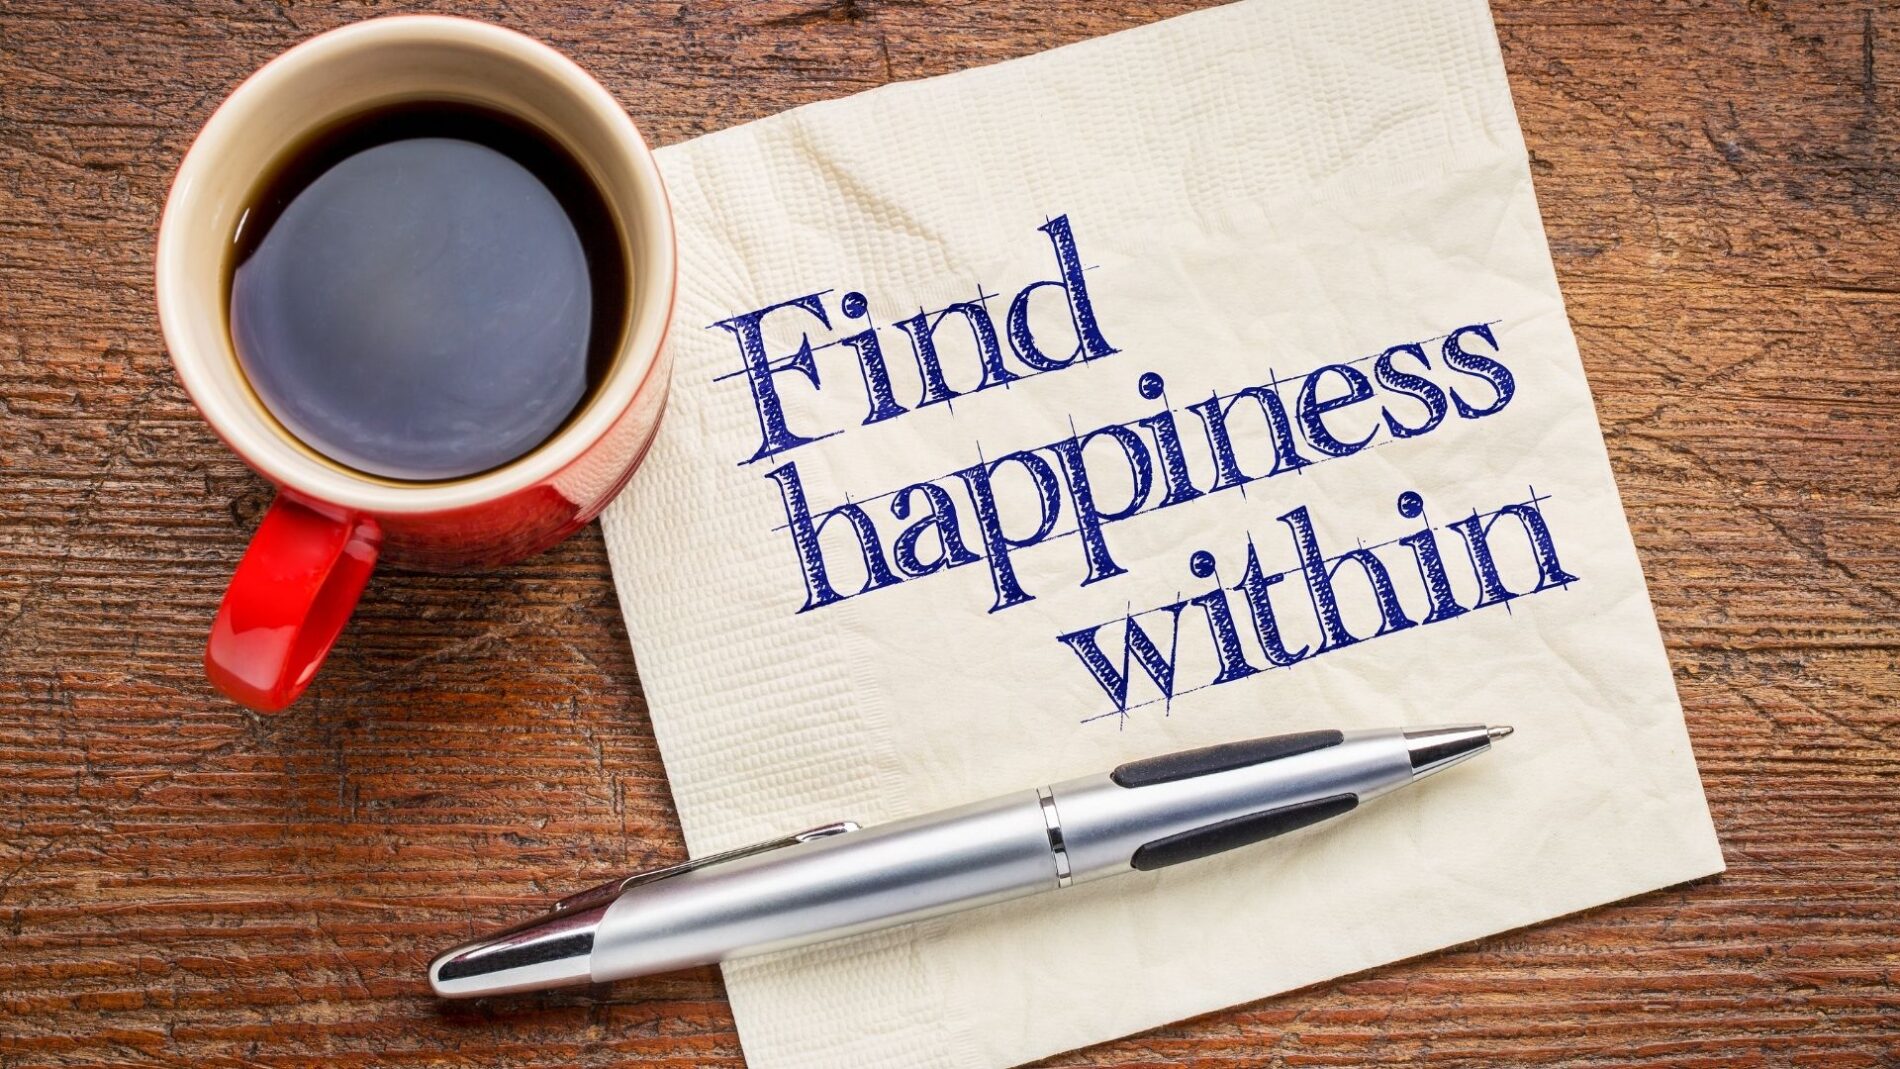 How to Find Happiness Within Yourself?